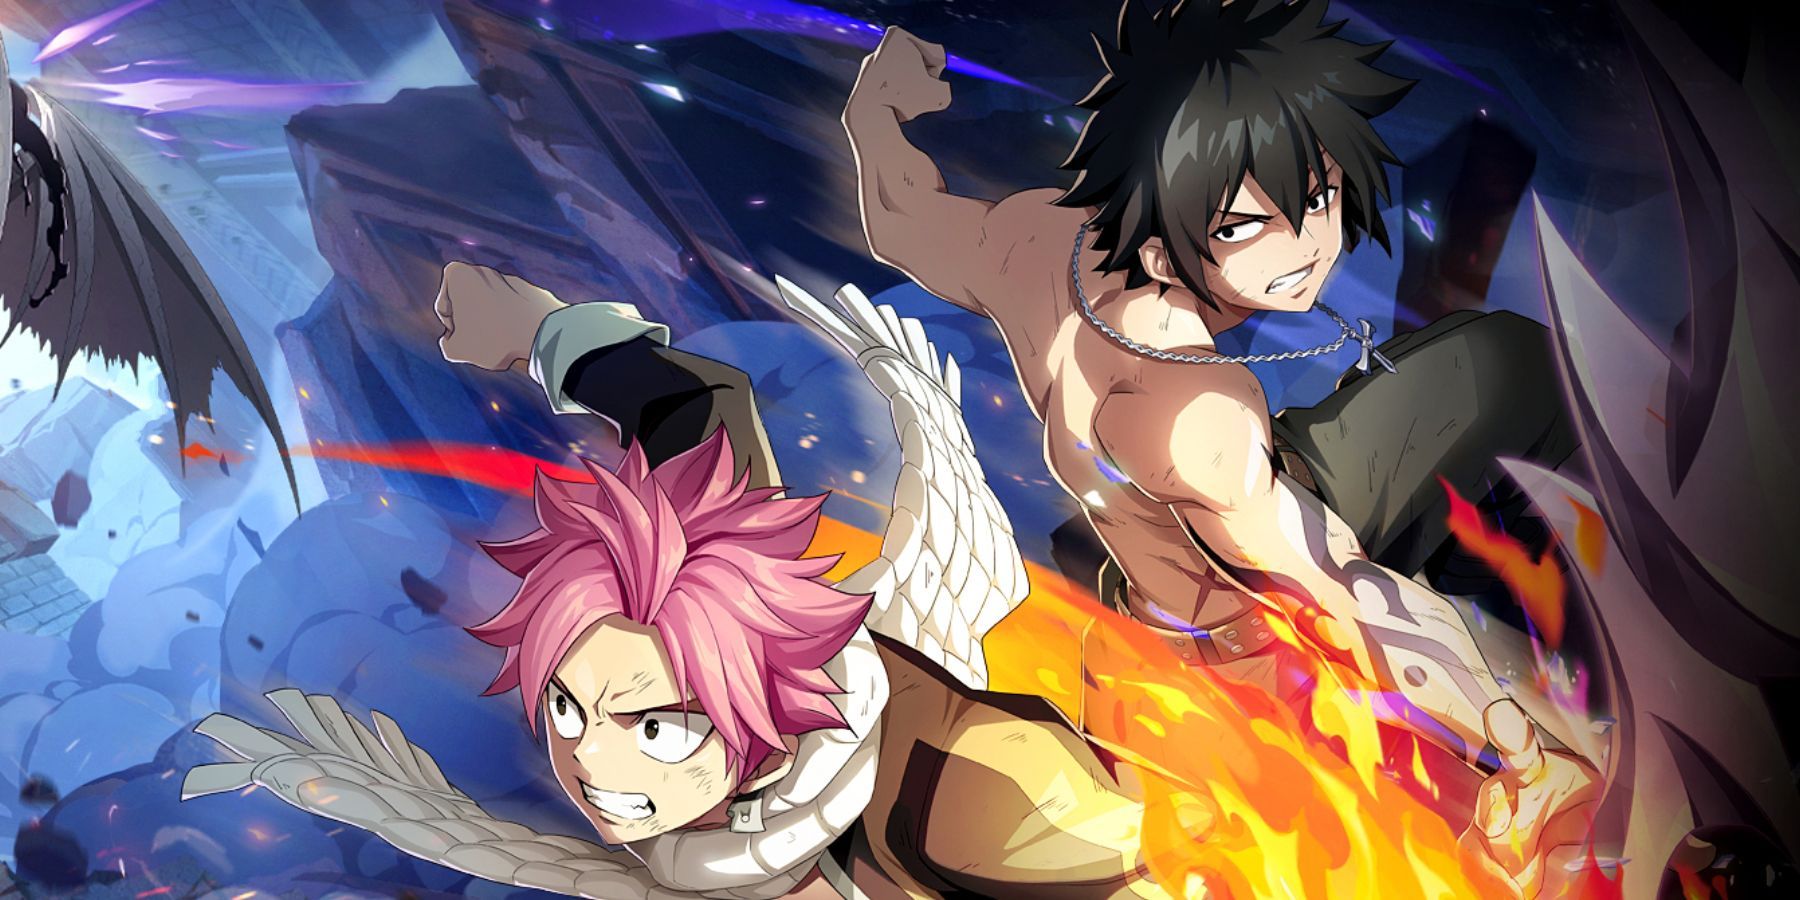 Fairy Tail: Fierce Fight characters